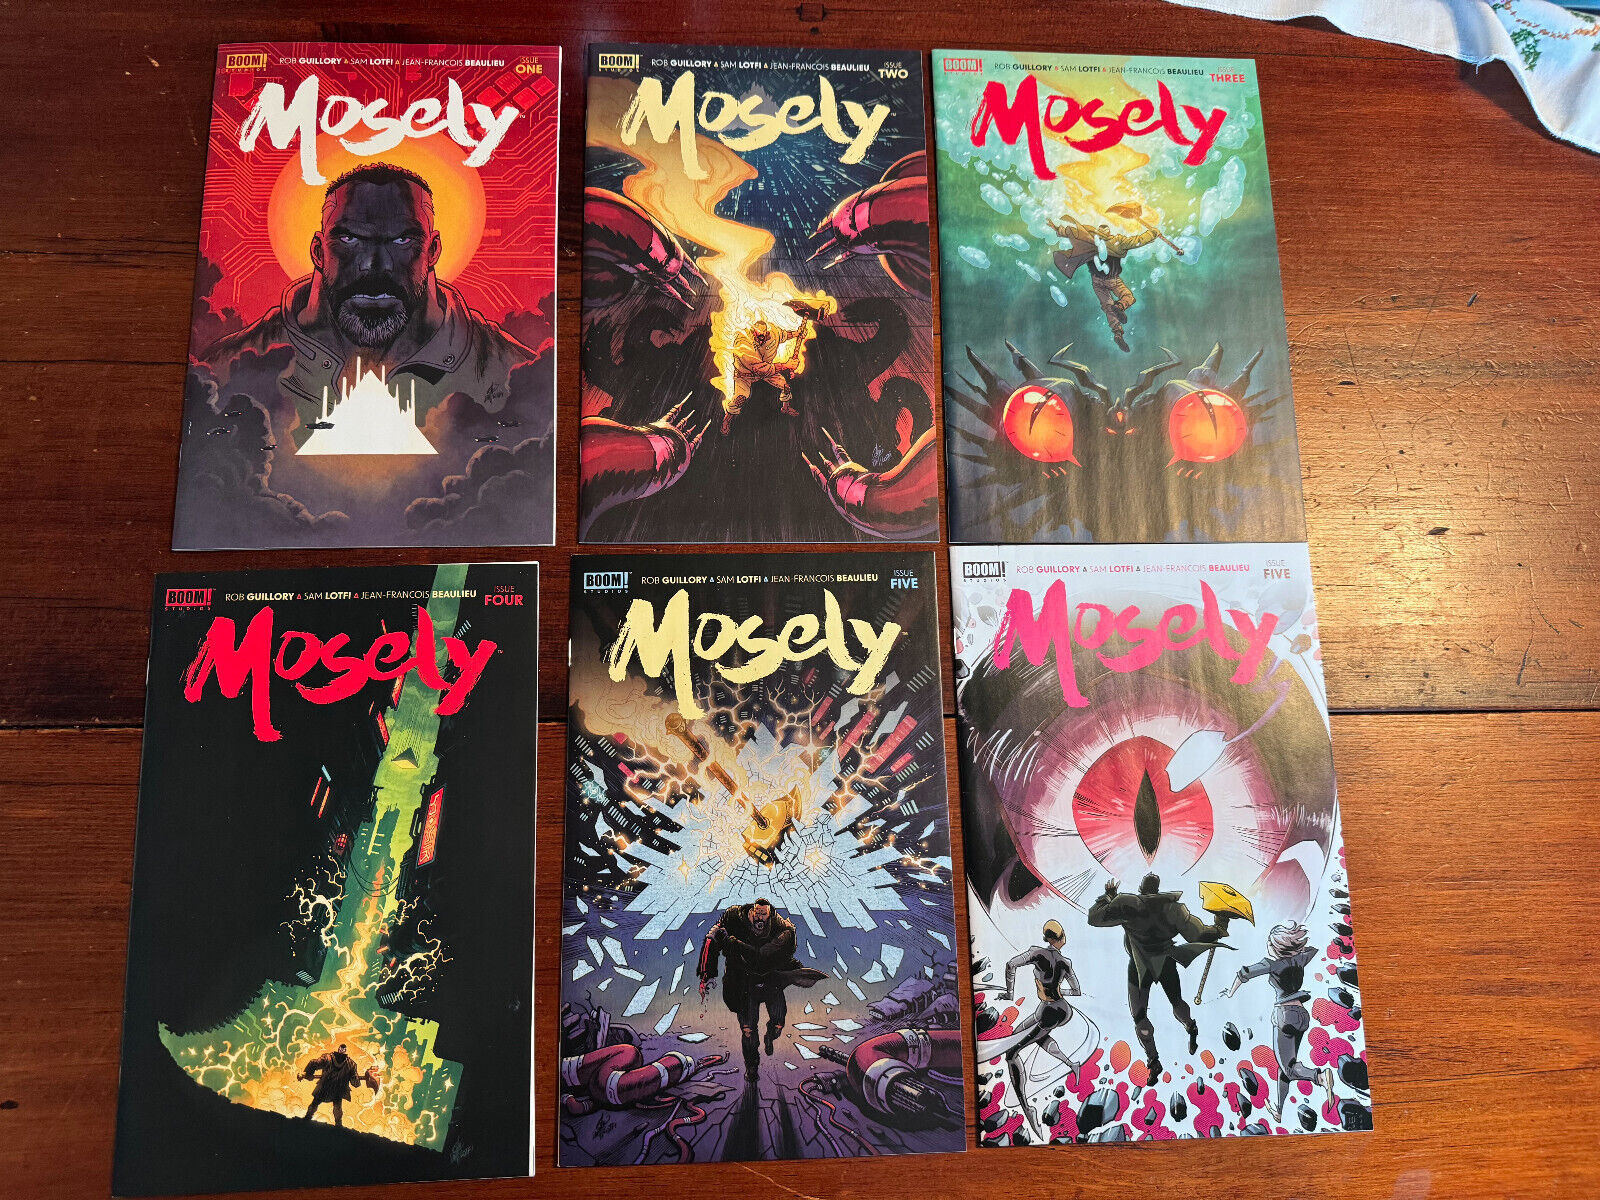 MOSELY #1-5 + #5 Variant-BOOM 2023-1st Printing-Complete Set-NICE-FAST SHIPPING